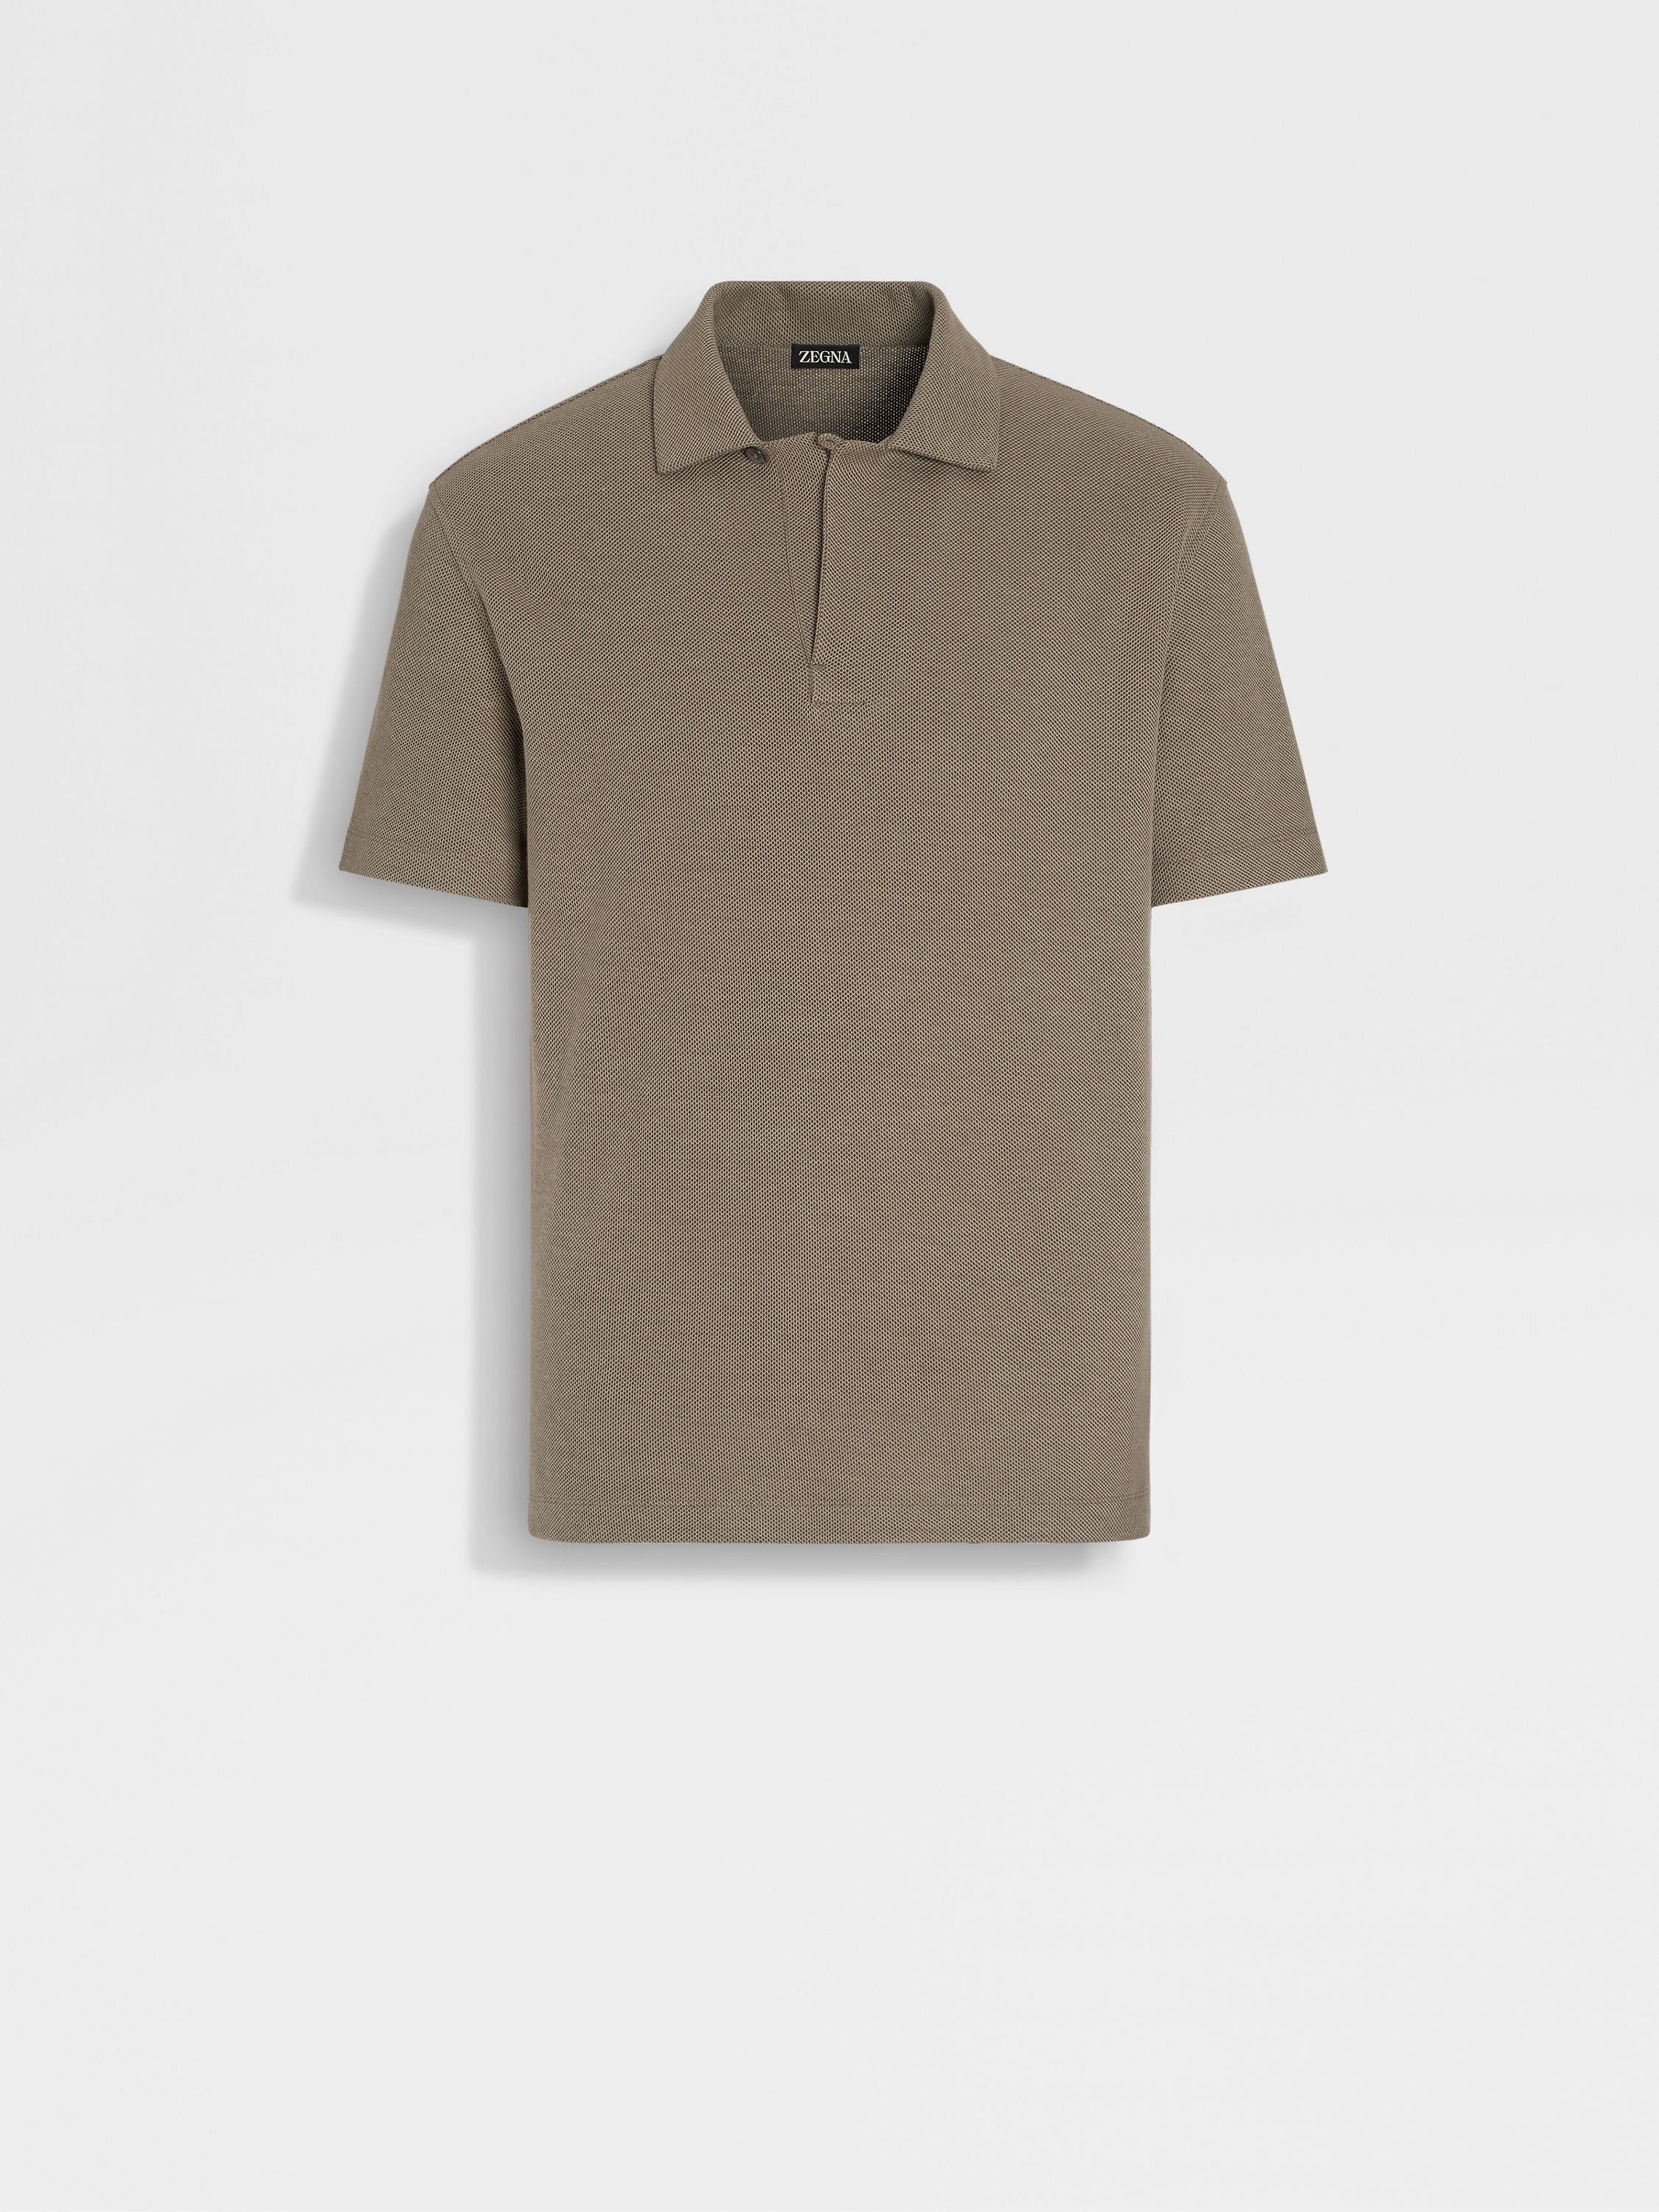 Olive Green Cotton Polo Shirt